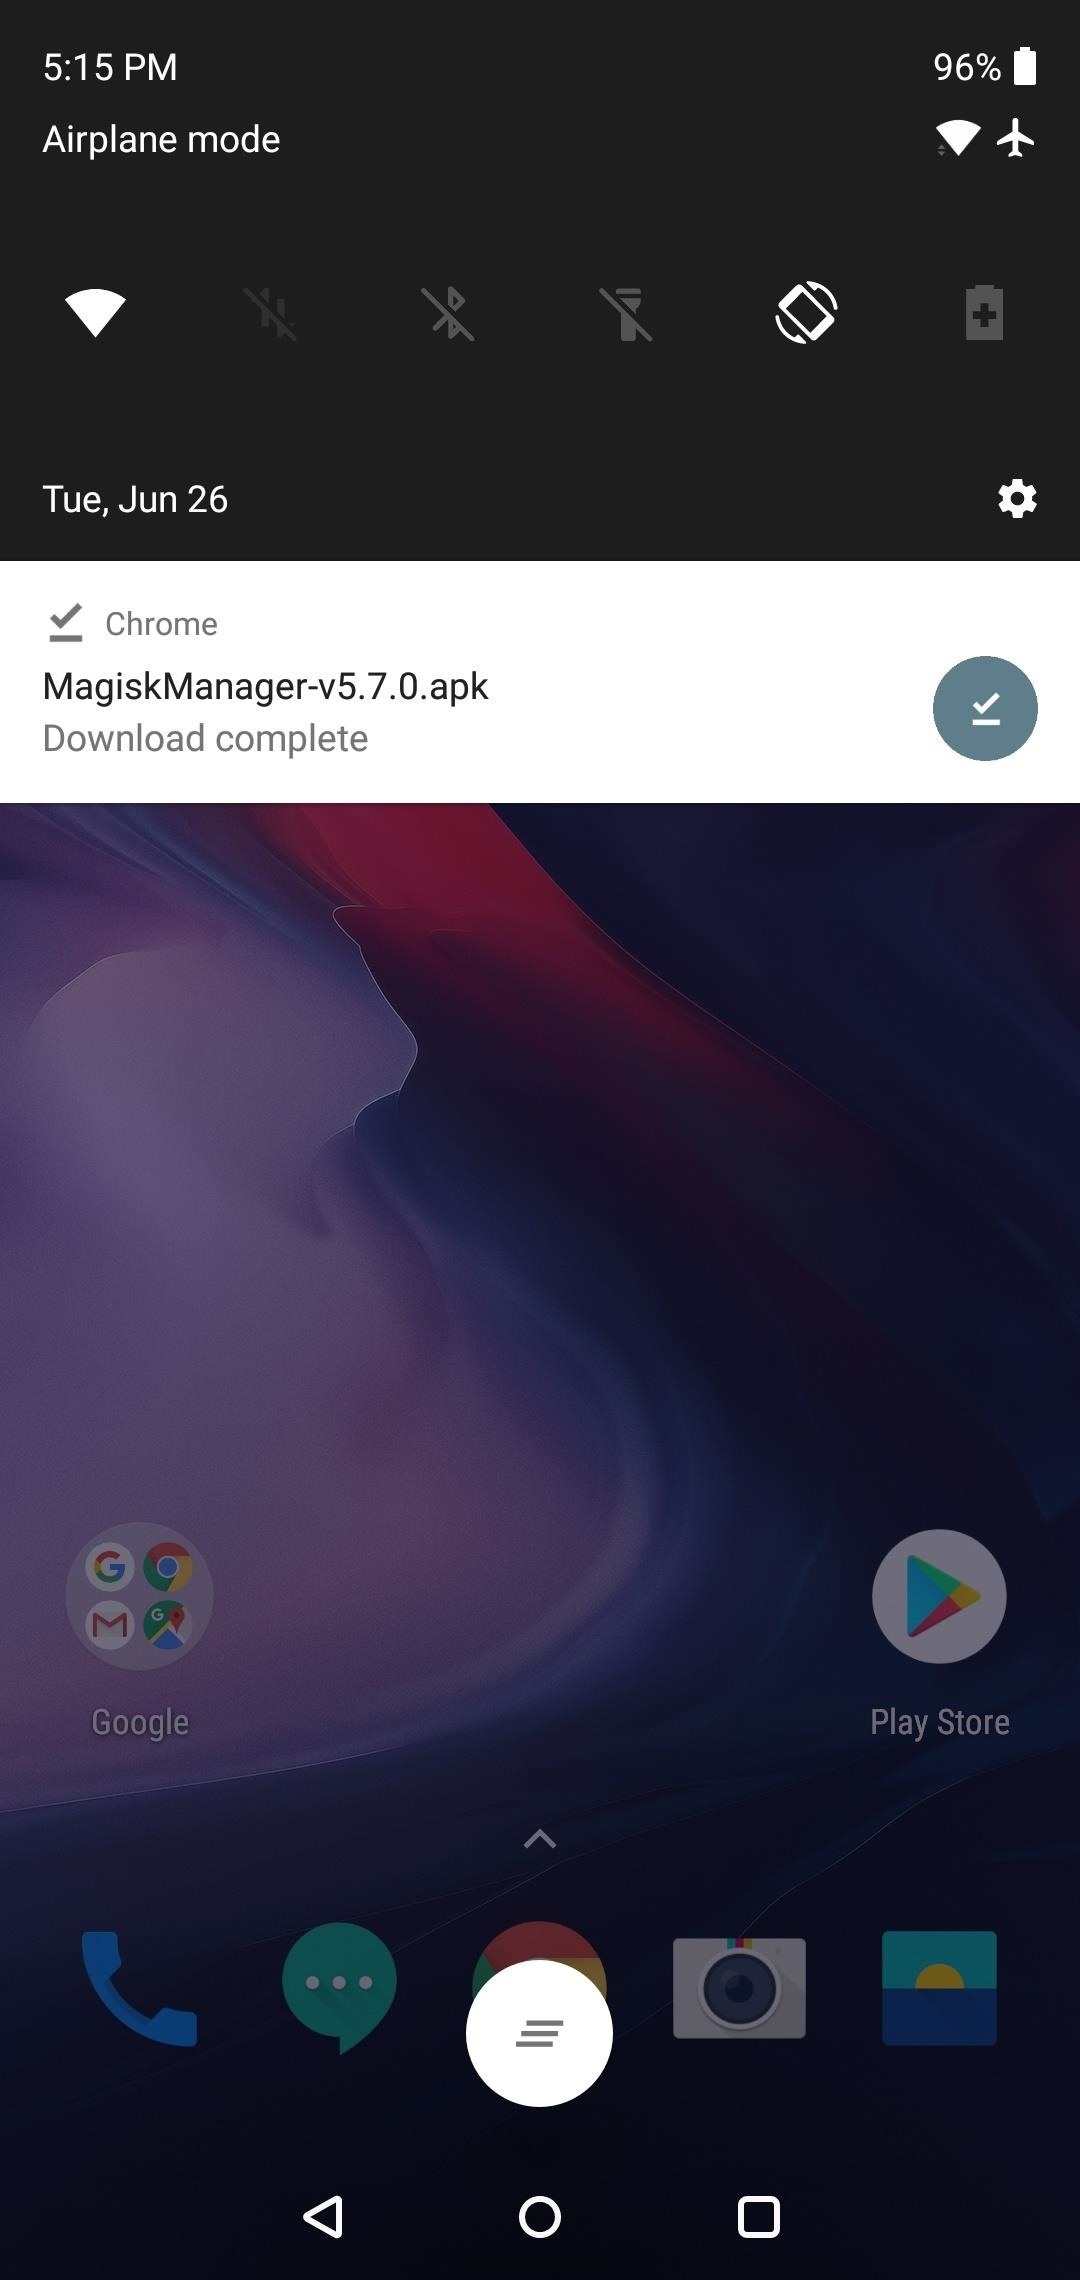 How to Root Your OnePlus 6 with Magisk — A Beginner's Guide